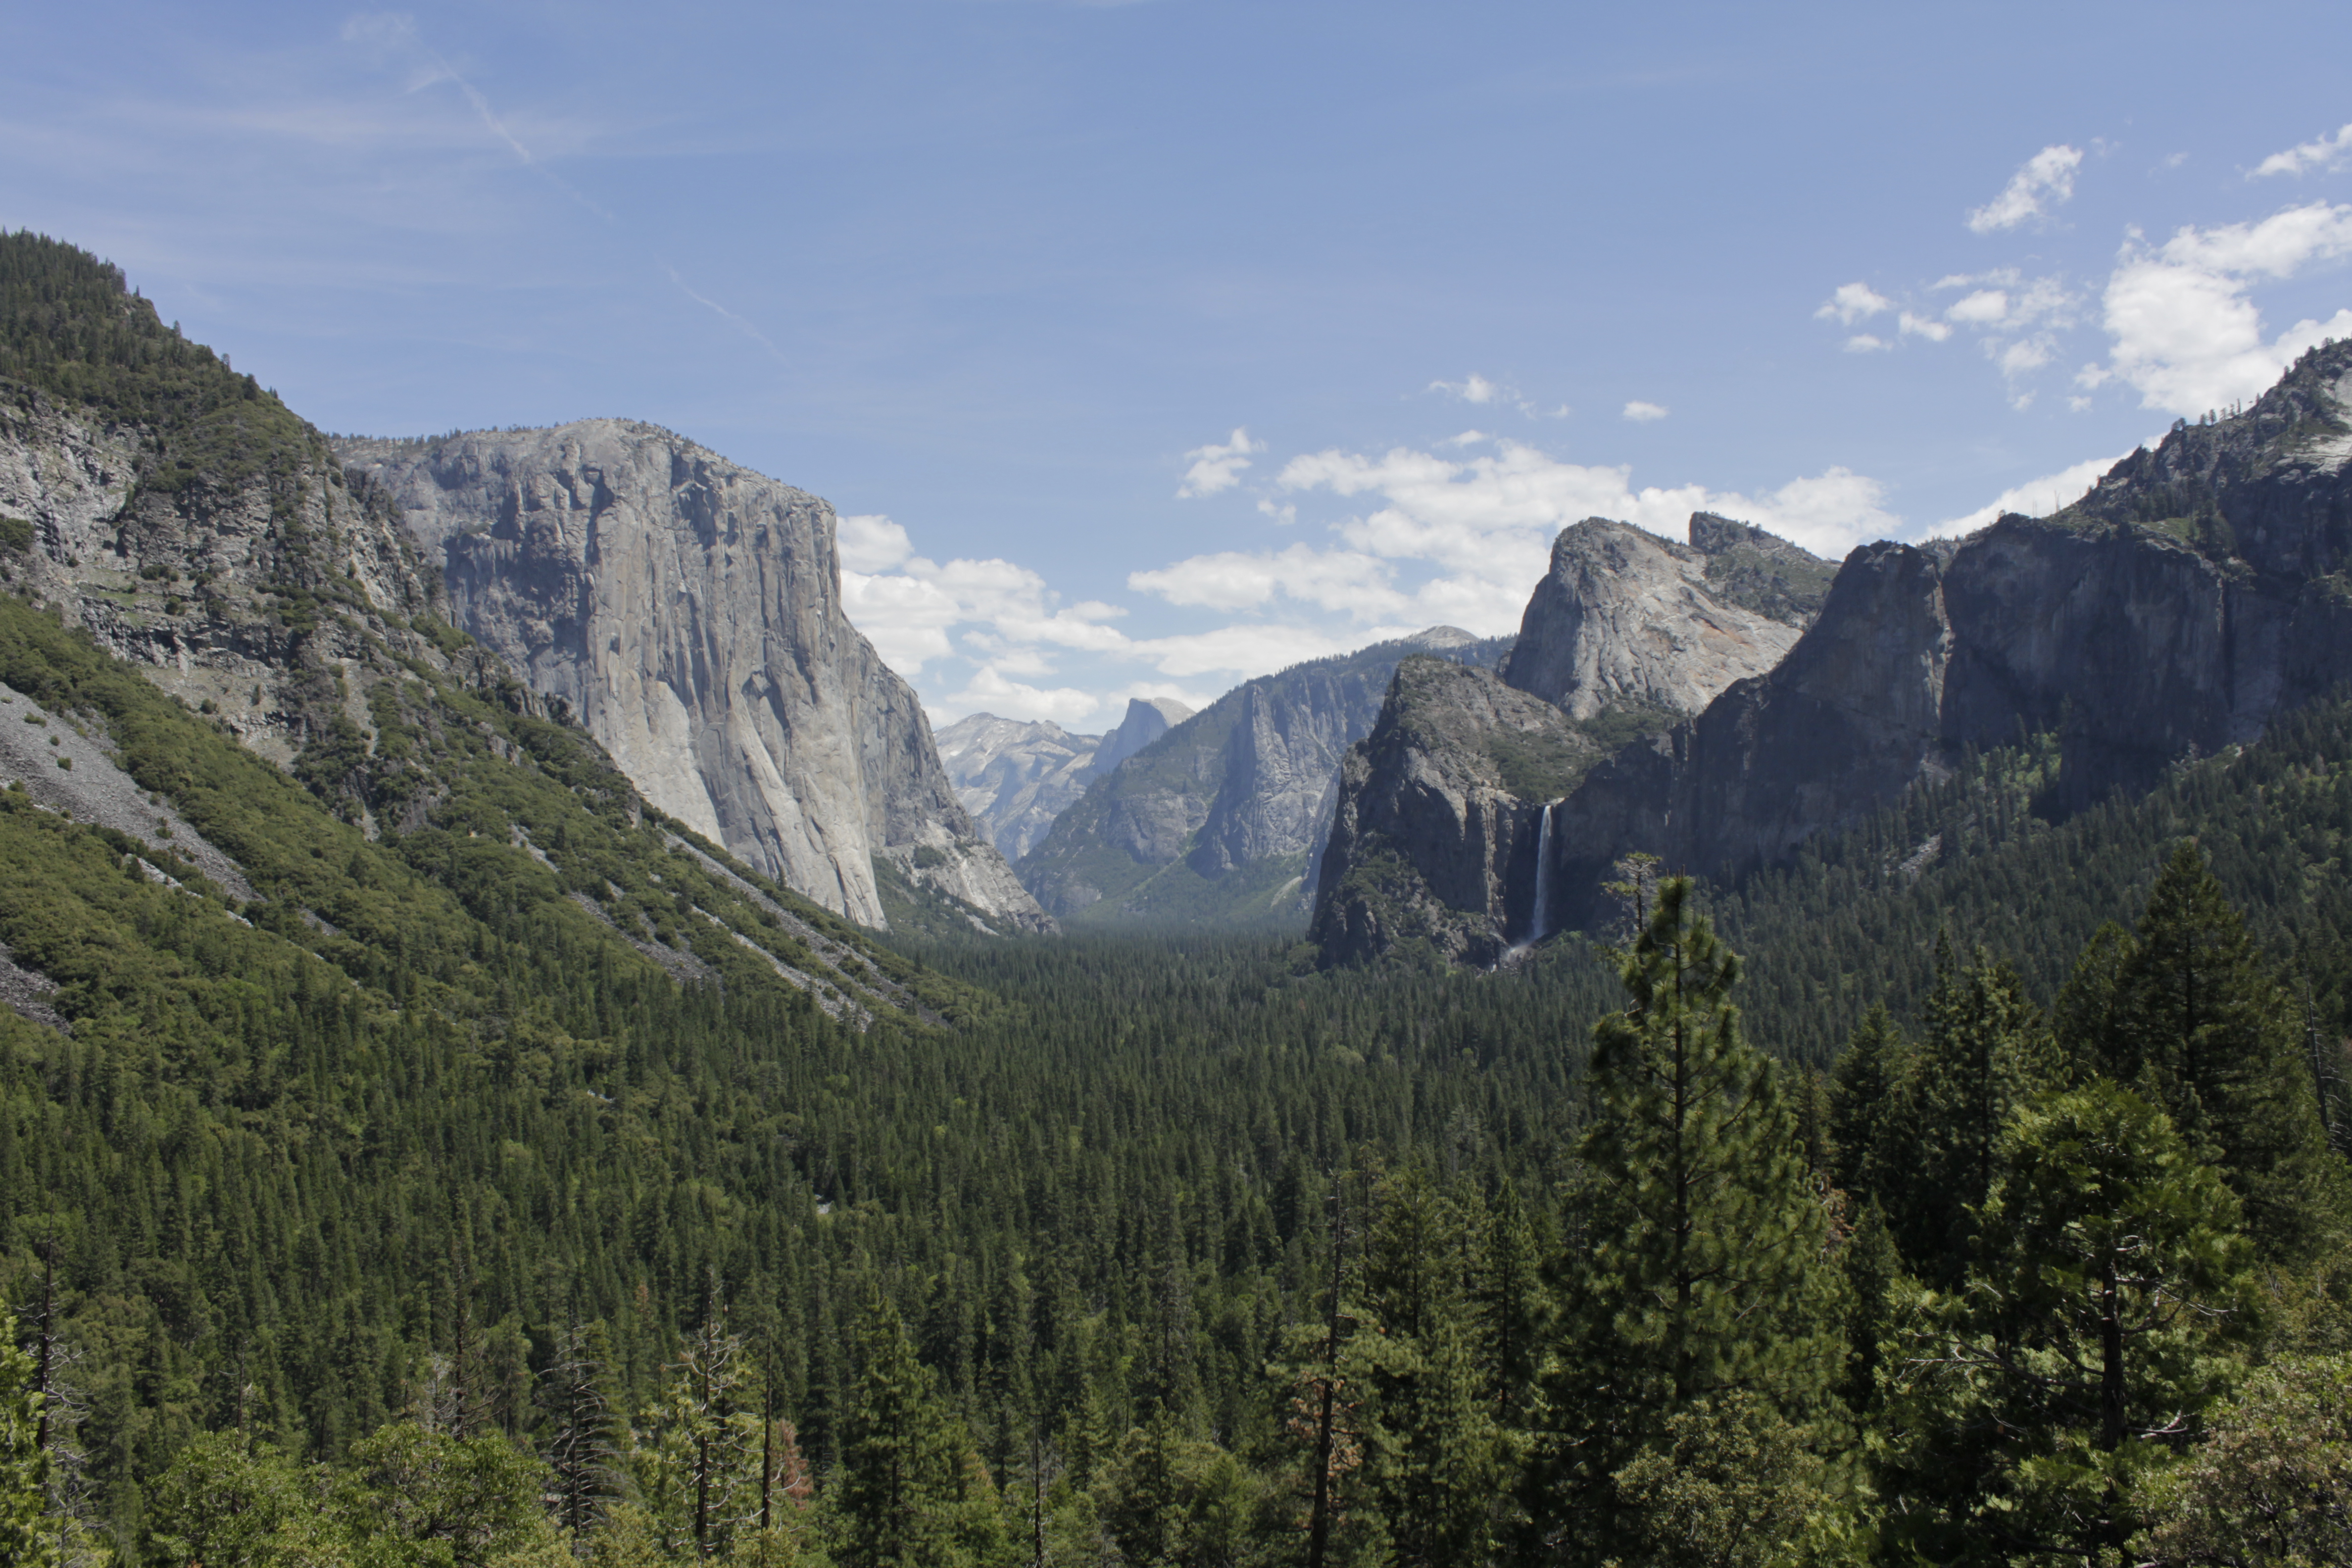 Image of View in Yosemite.